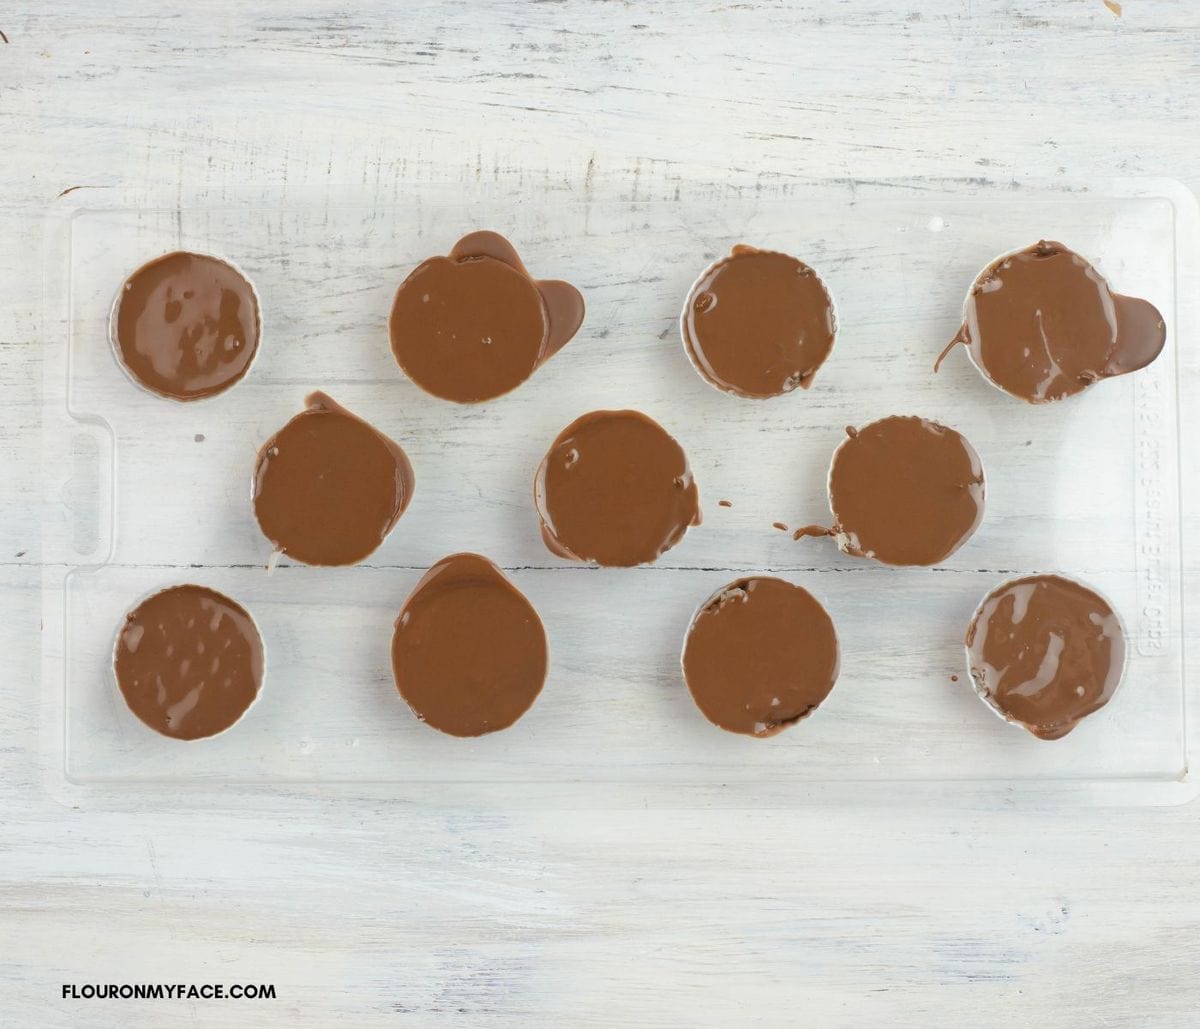 Image showing the filled candy mold before the chocolate has hardened.